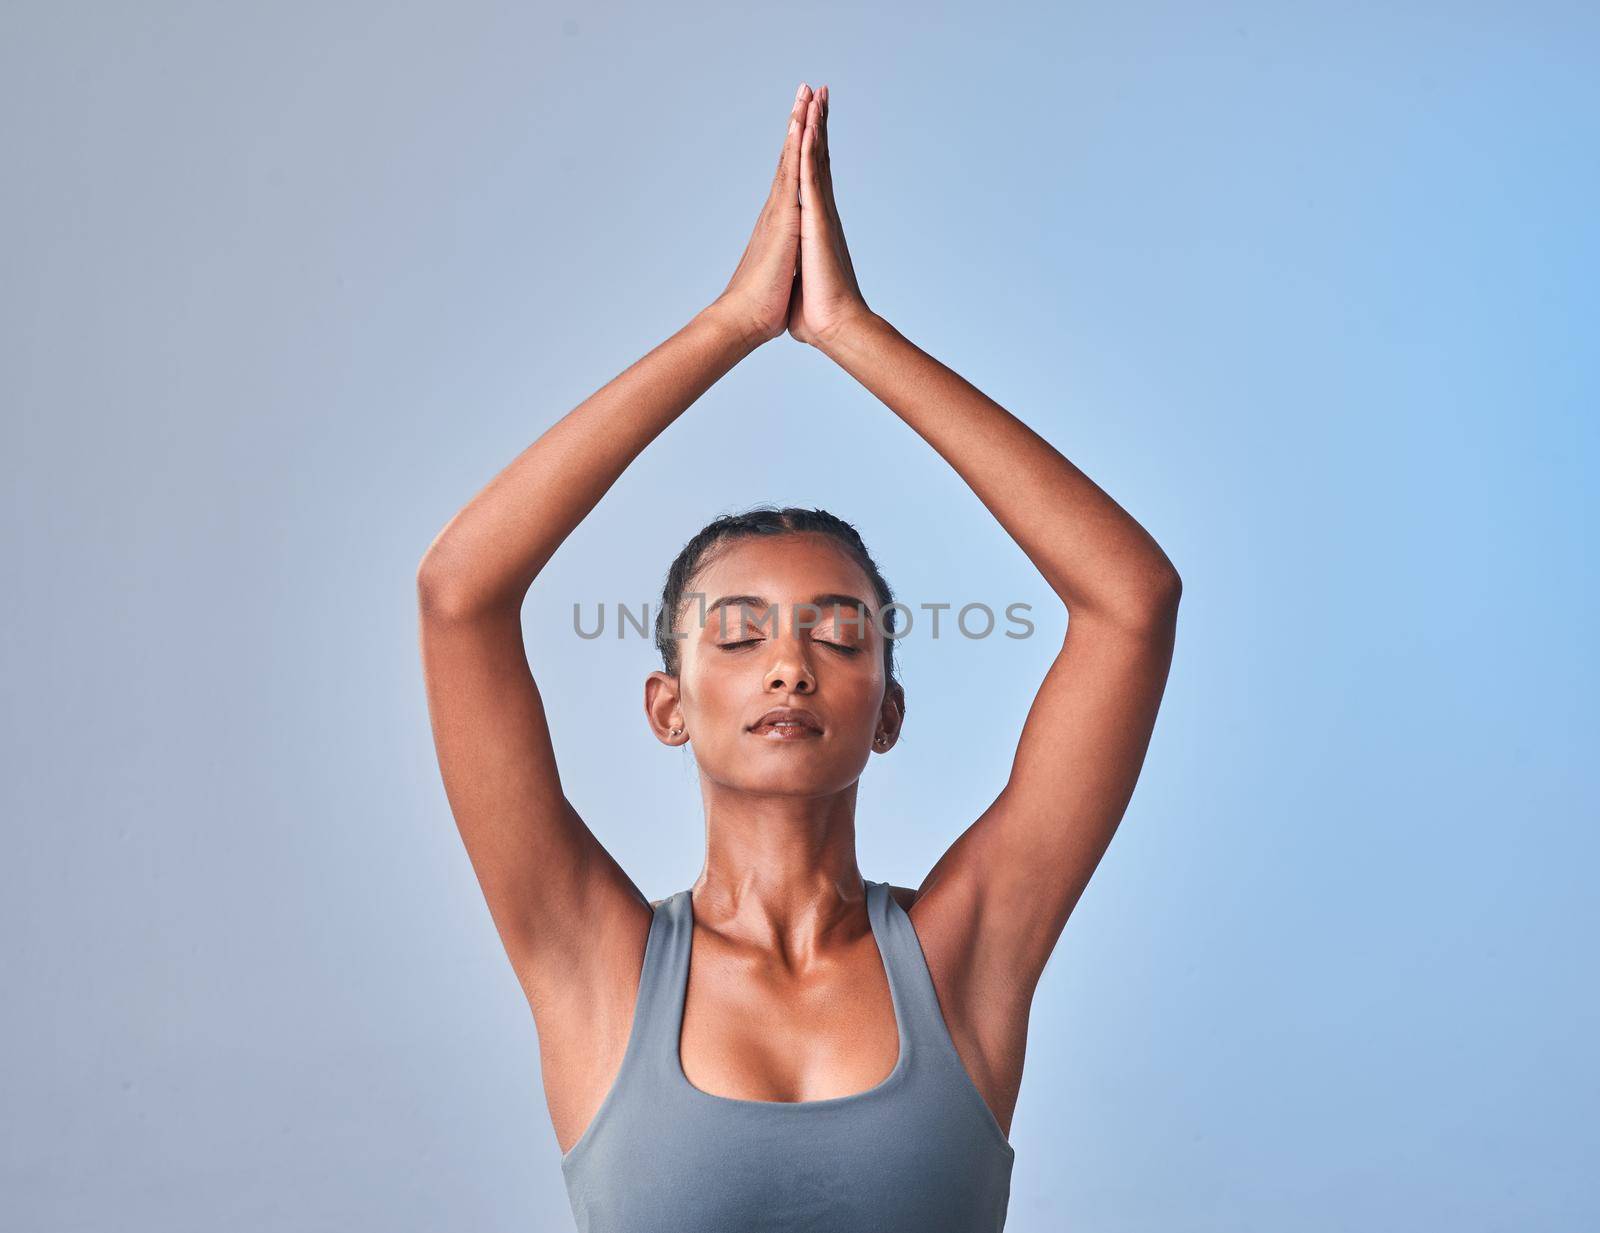 Meditation is medicine for the mind. Studio shot of a fit young woman meditating against a grey background. by YuriArcurs